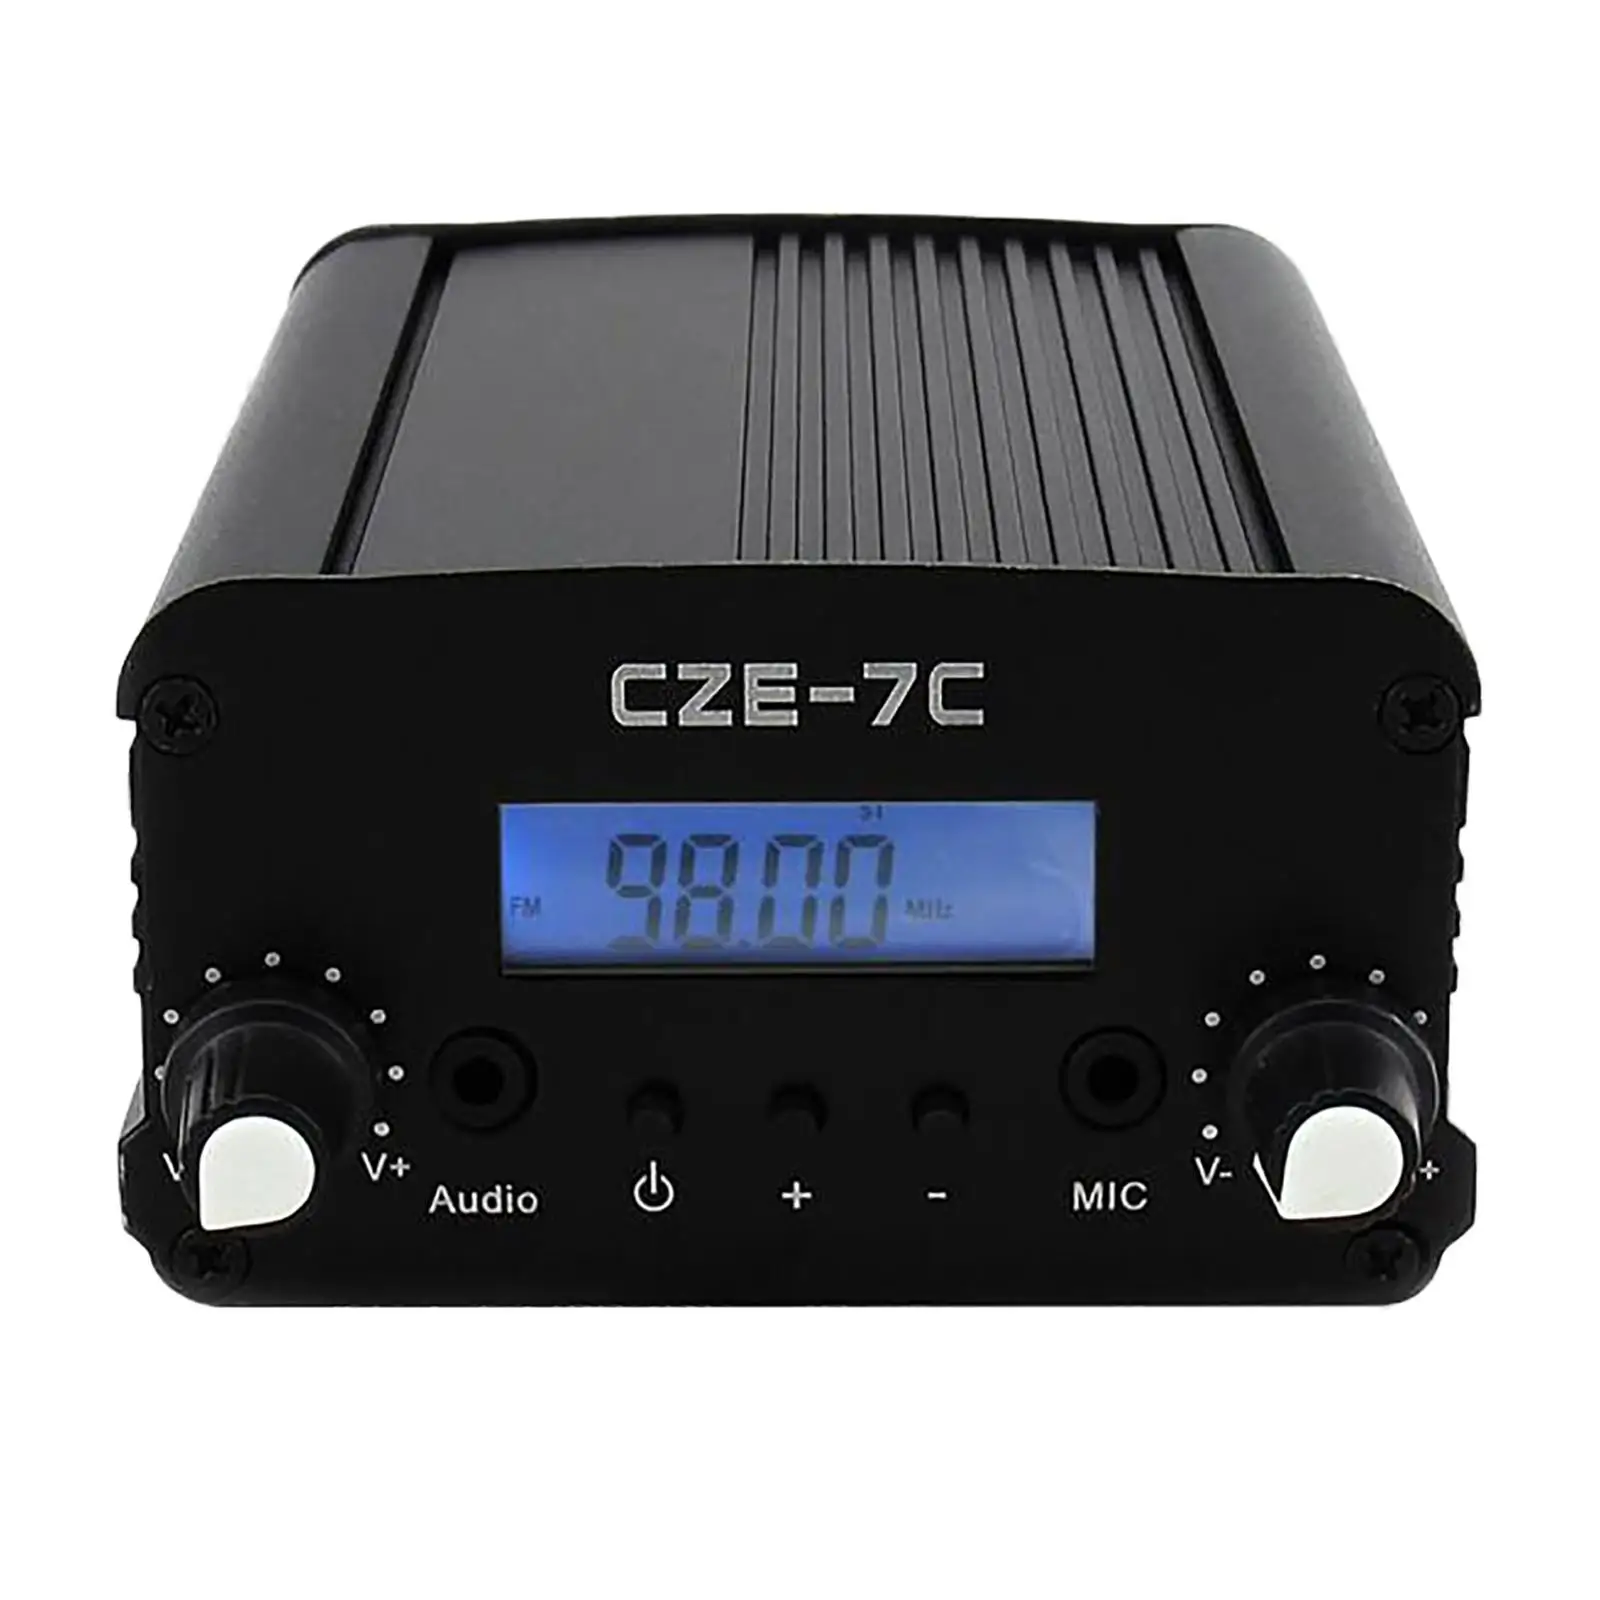 Wireless radio Transmitters NC FM Stereo Black Frequency 76-108MHz for Broadcast Station